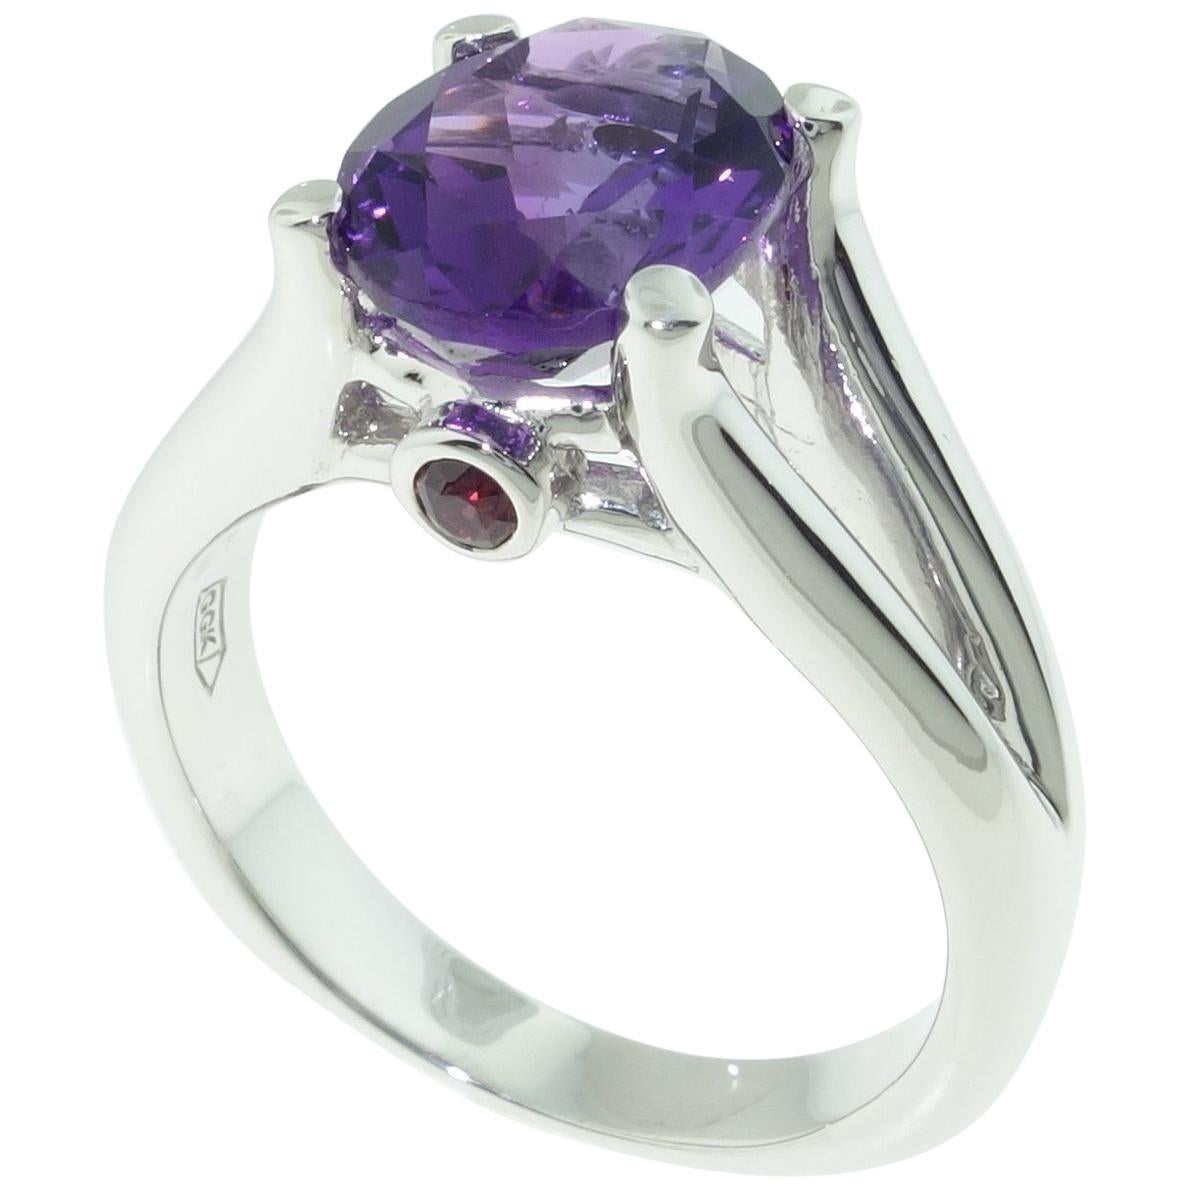 2.30 Carat Amethyst and Sapphire Solitaire Ring Estate Fine Jewelry For Sale